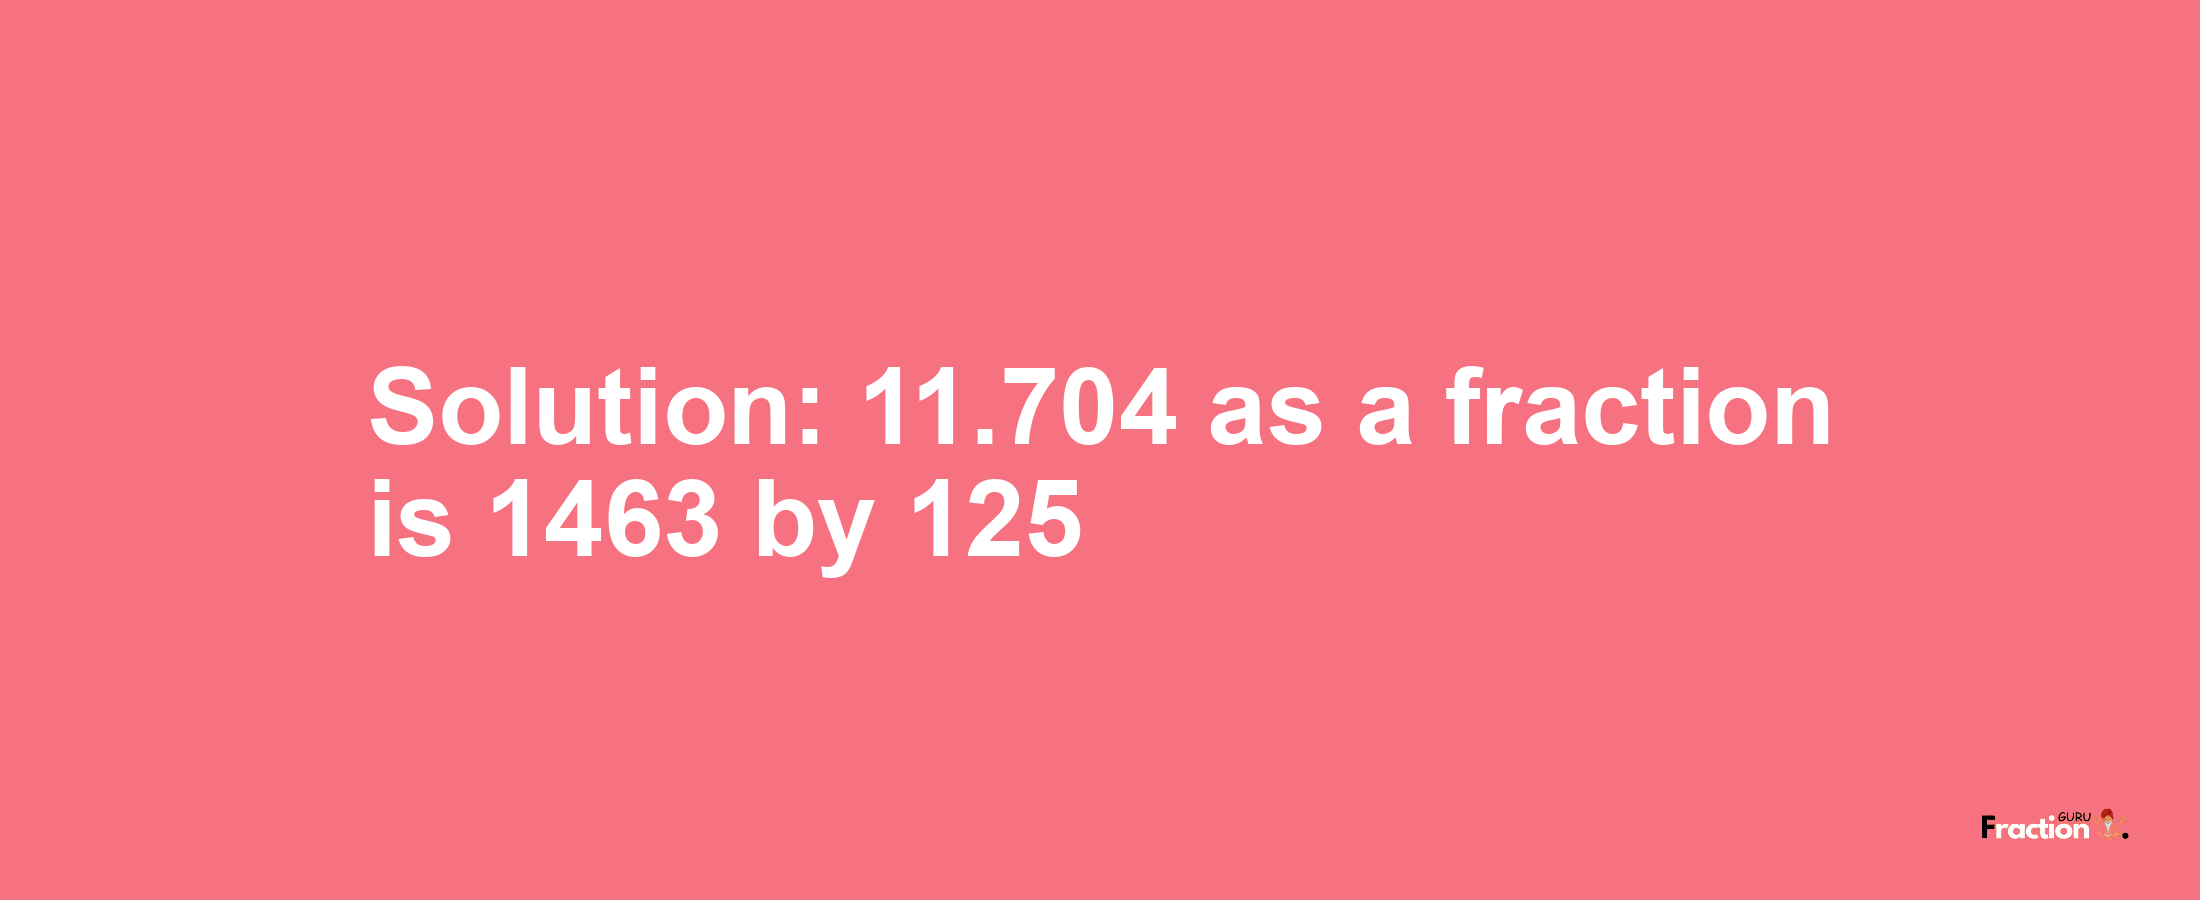 Solution:11.704 as a fraction is 1463/125